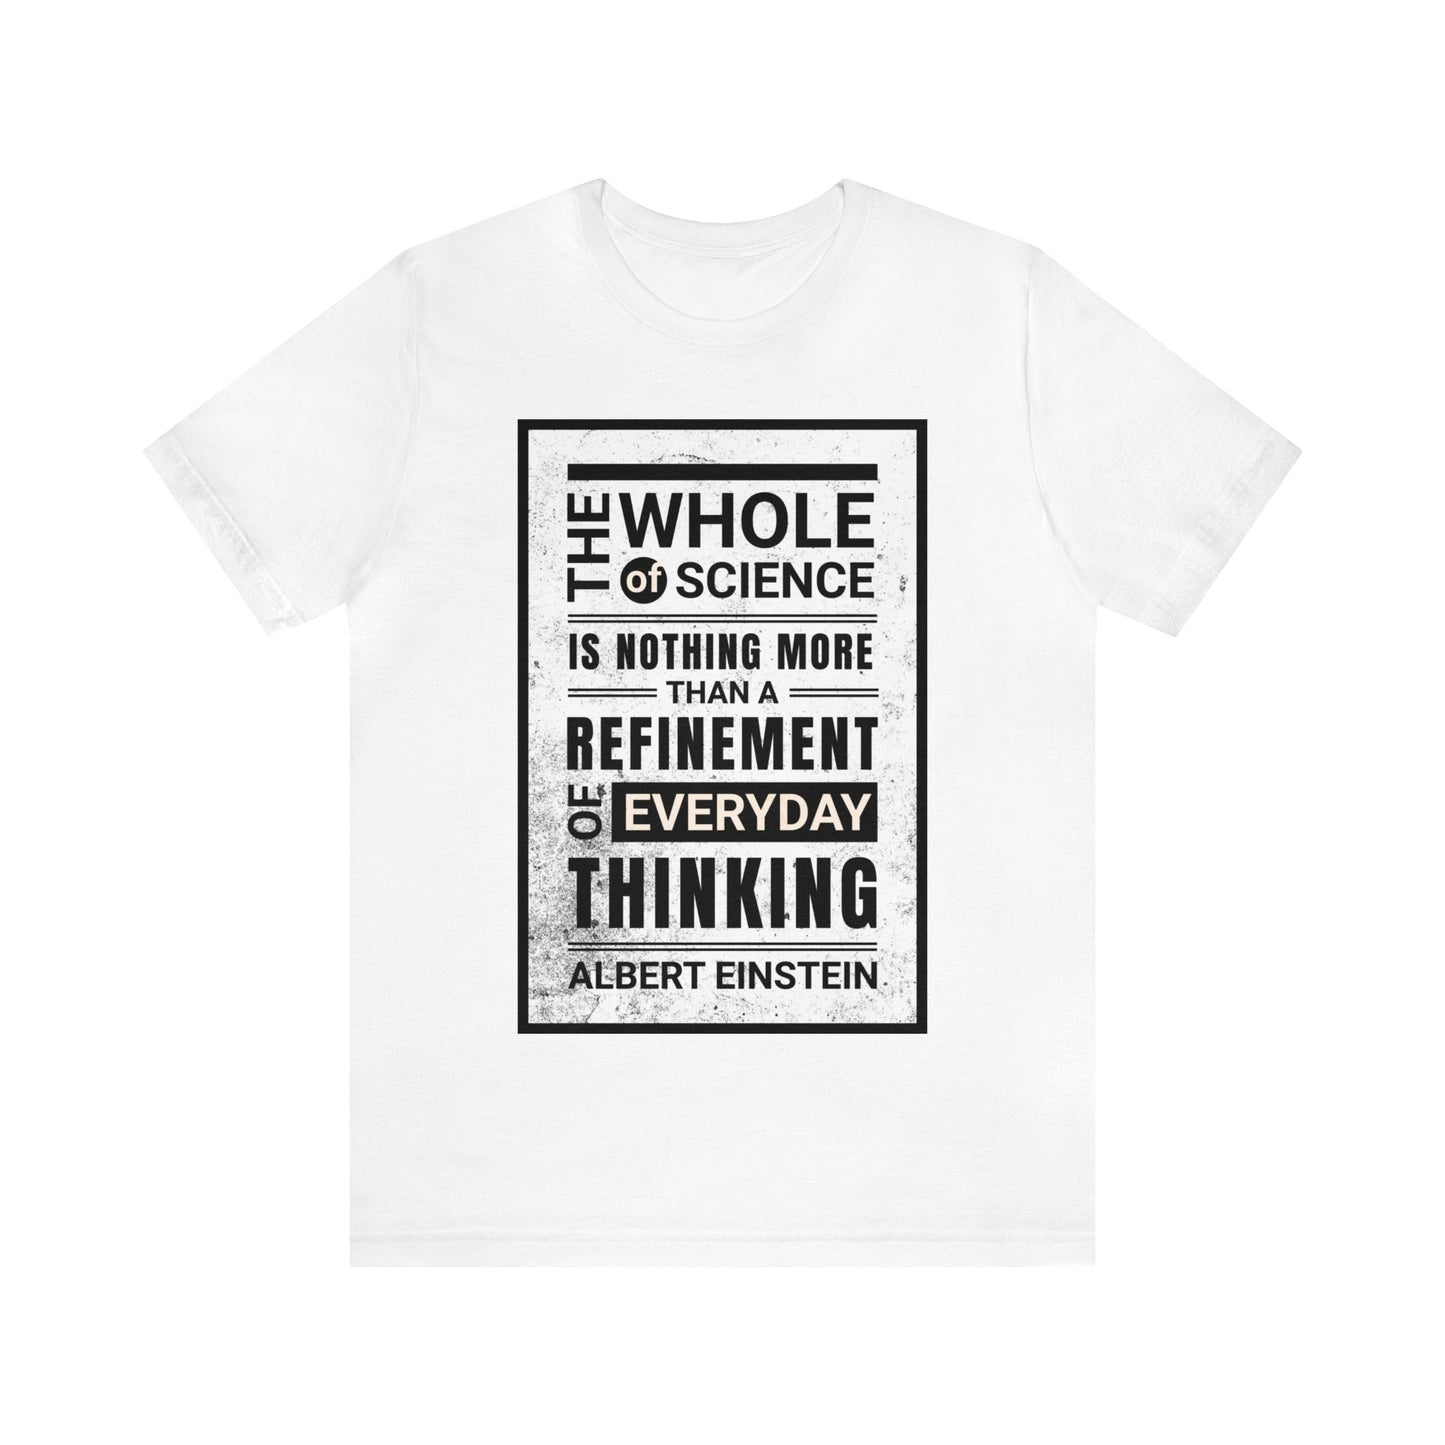 https://chat.openai.com/c/9b6e1681-77ab-44c0-8b88-311afb298e0e#:~:text=Ethical%20and%20comfortable%20science%20quote%20cotton%20shirt